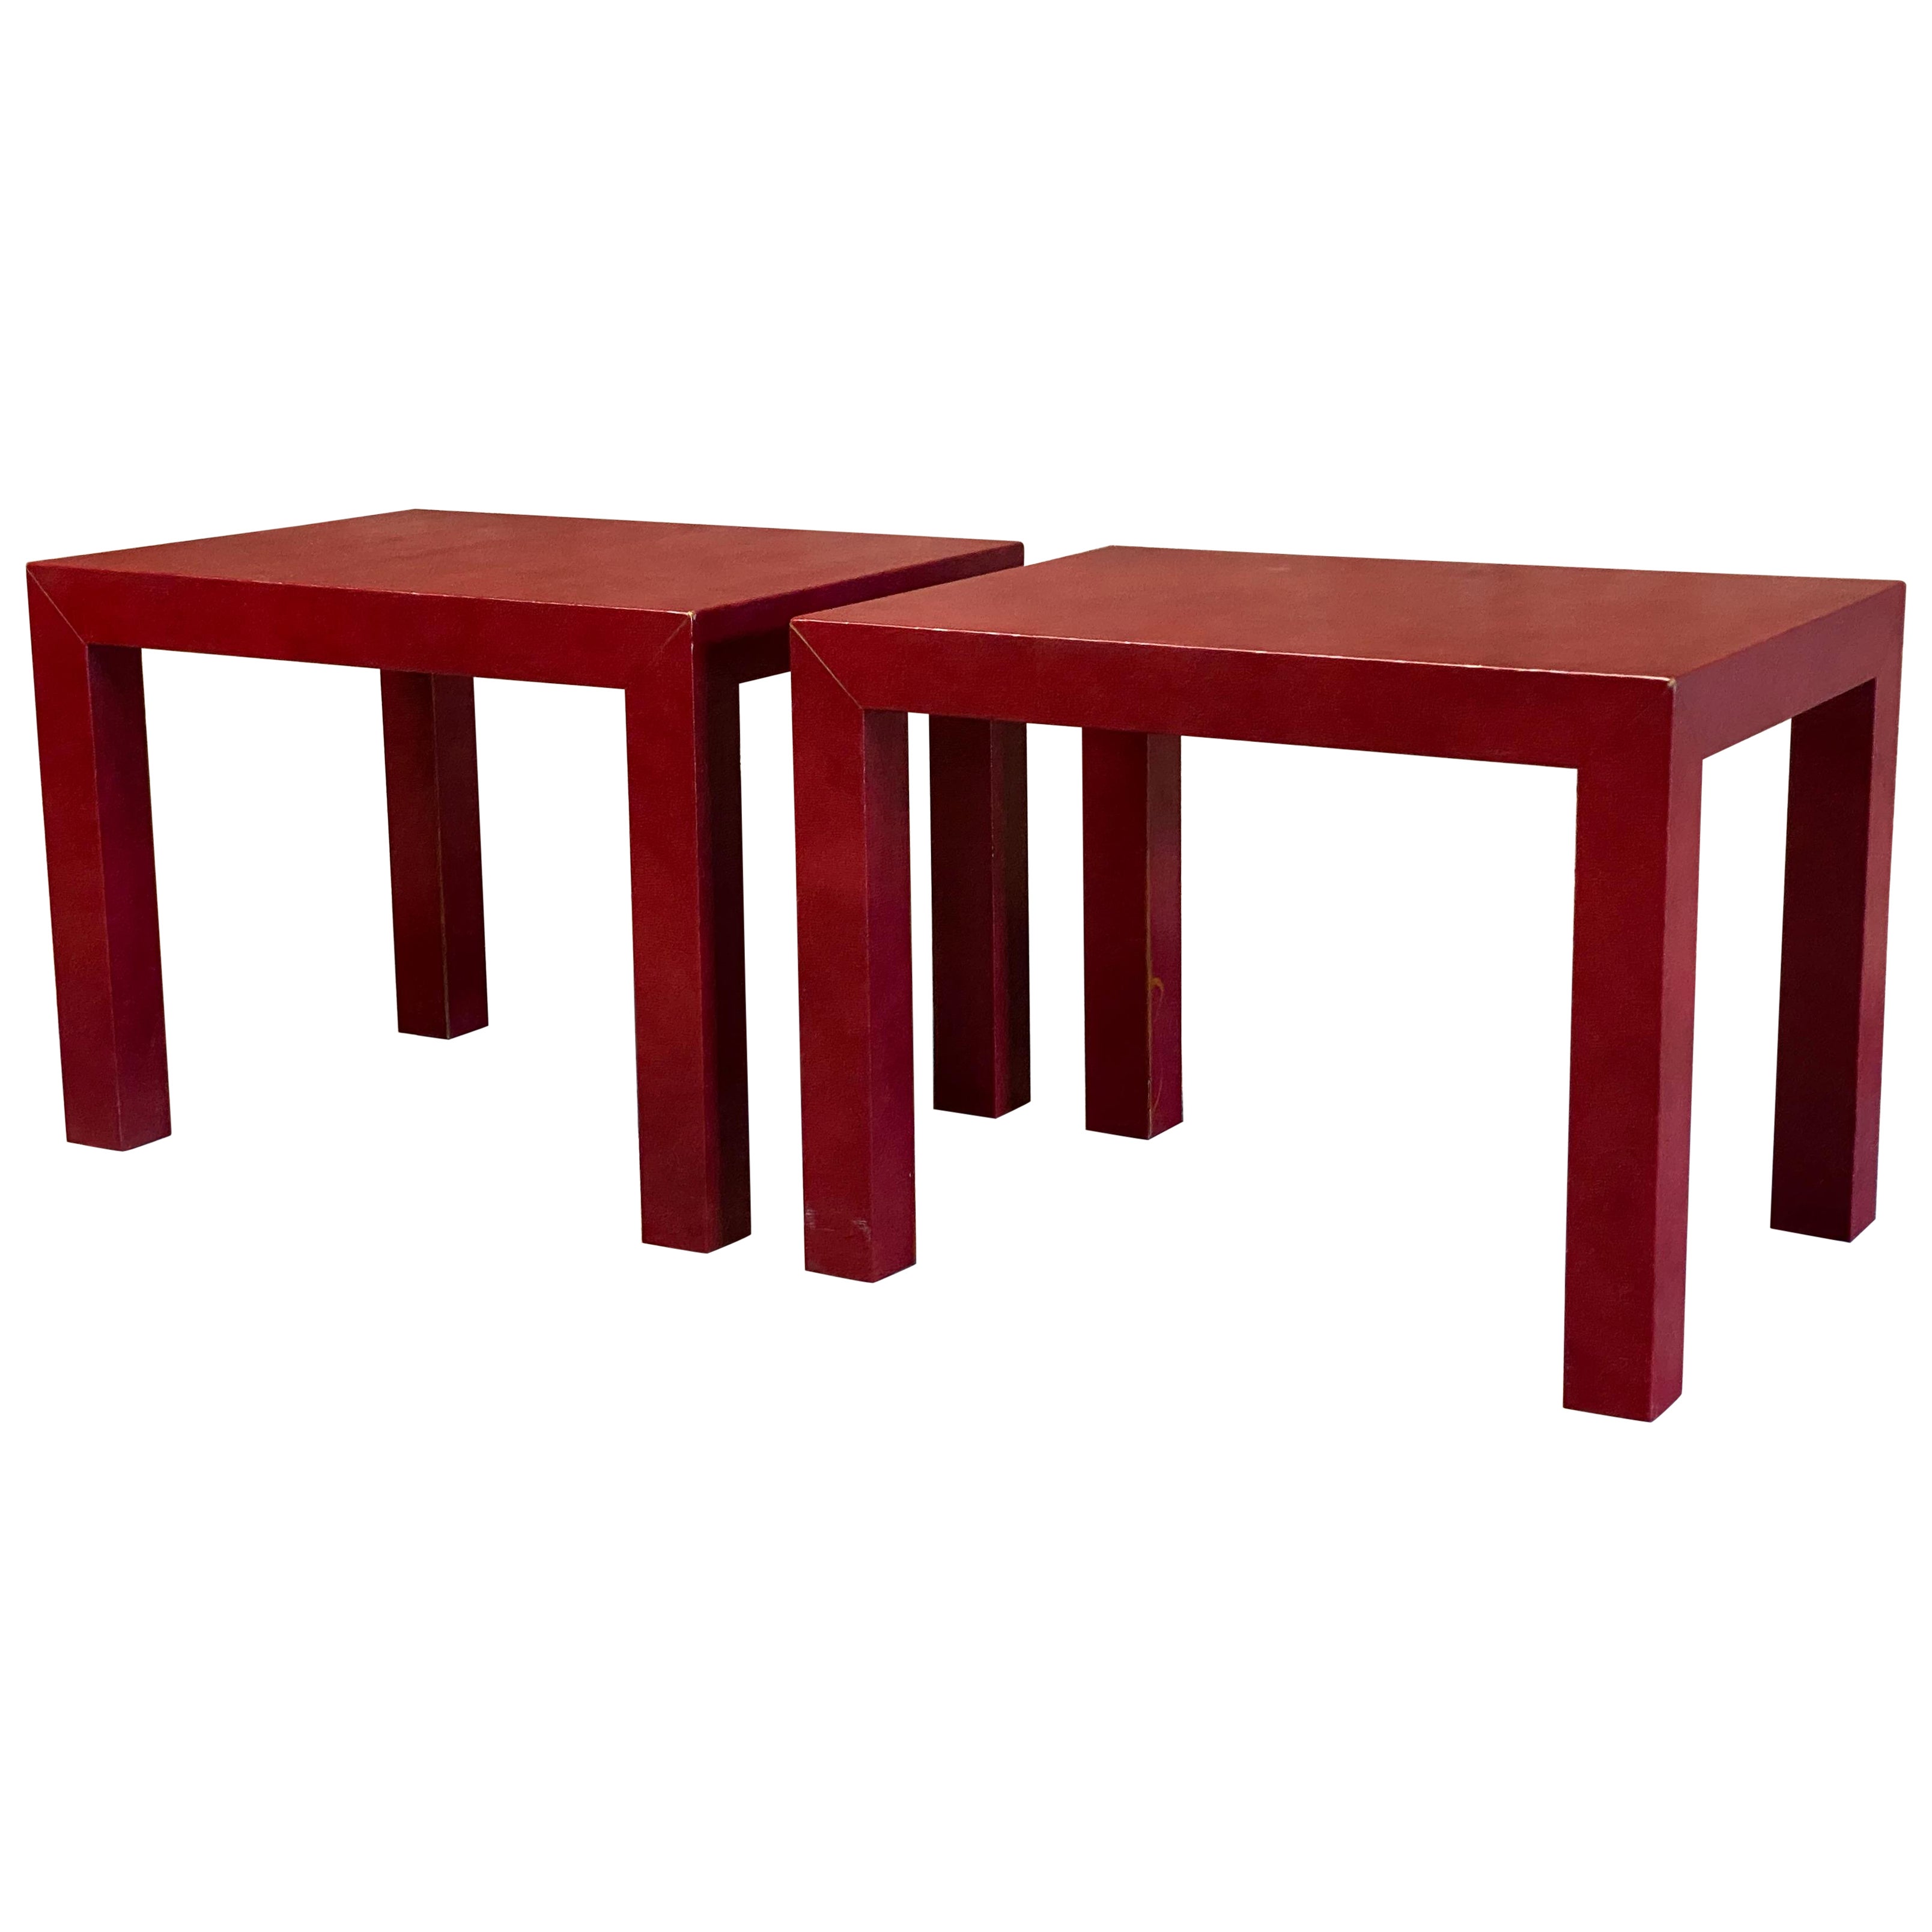 Red Faux Lizard Skin Parsons Post Modern End Tables For Sale